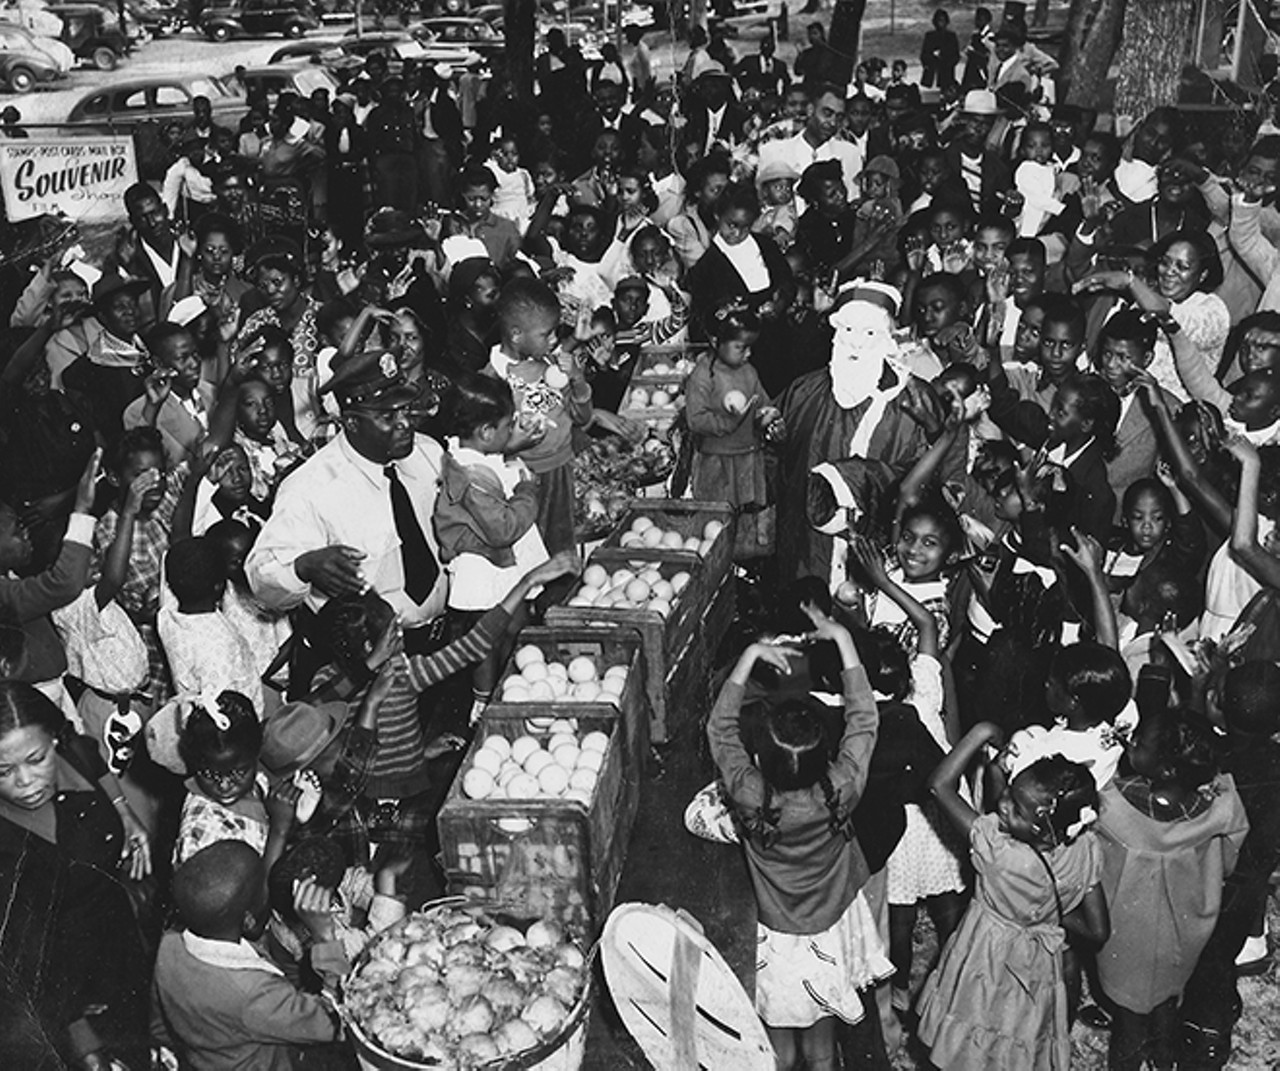 The Christmas holiday season was a time when many families gathered at Paradise Park. Often the park staff would distribute oranges to the families. Photo by Bruce Mozert. By permission of Bruce Mozert. Courtesy of the Marion County Black Archives. Reprinted with permission of the University Press of Florida.